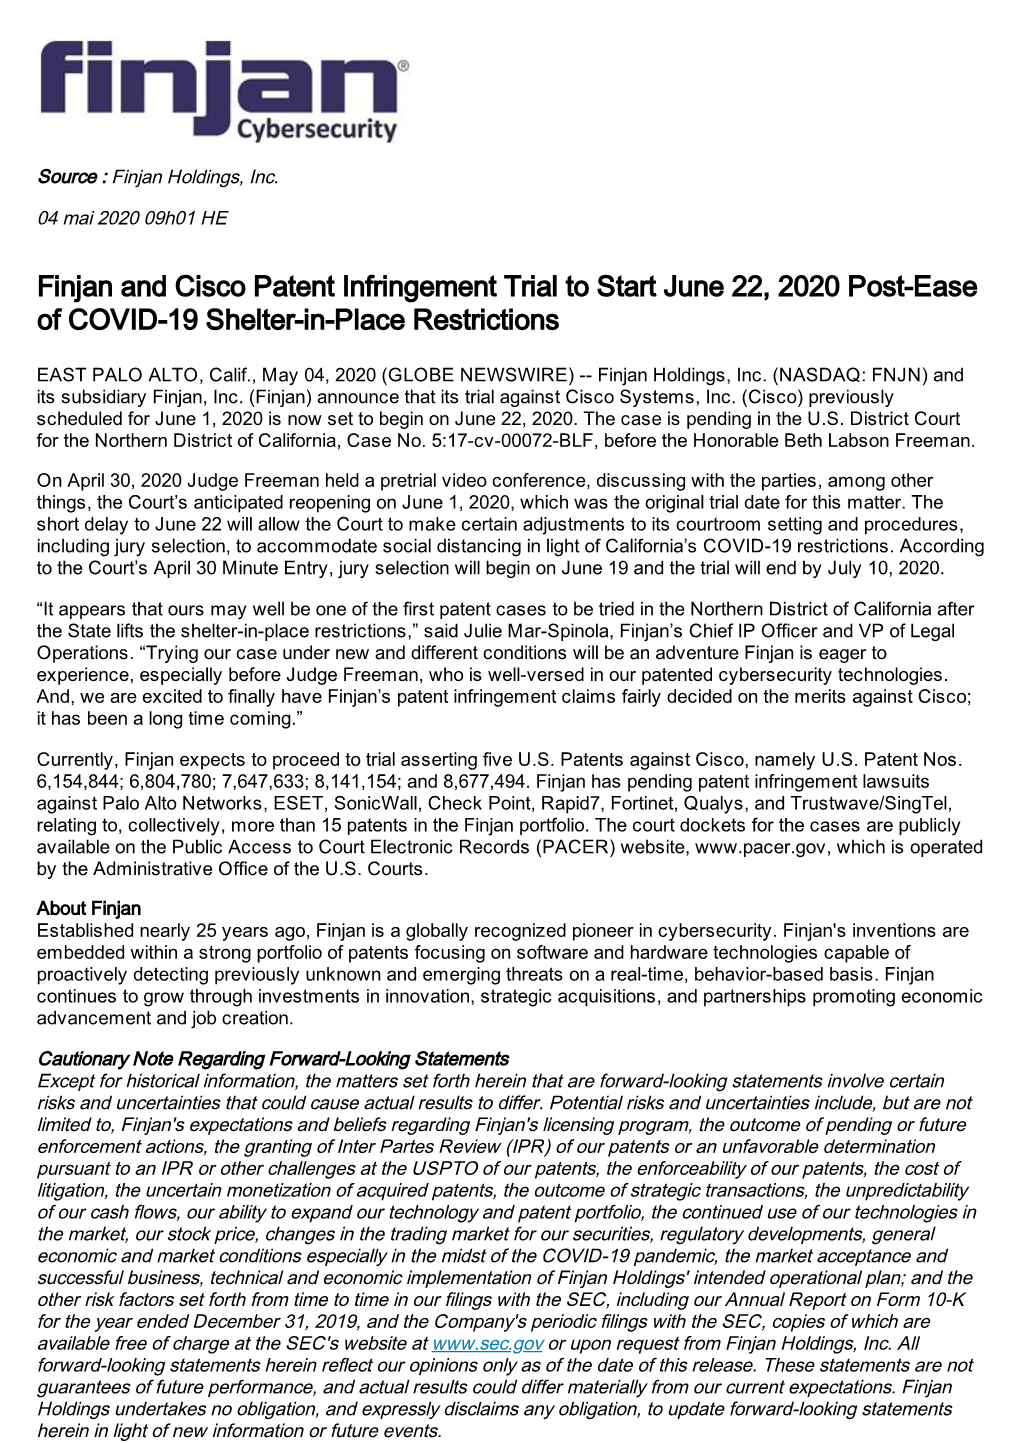 Finjan and Cisco Patent Infringement Trial to Start June 22, 2020 Post-Ease of COVID-19 Shelter-In-Place Restrictions